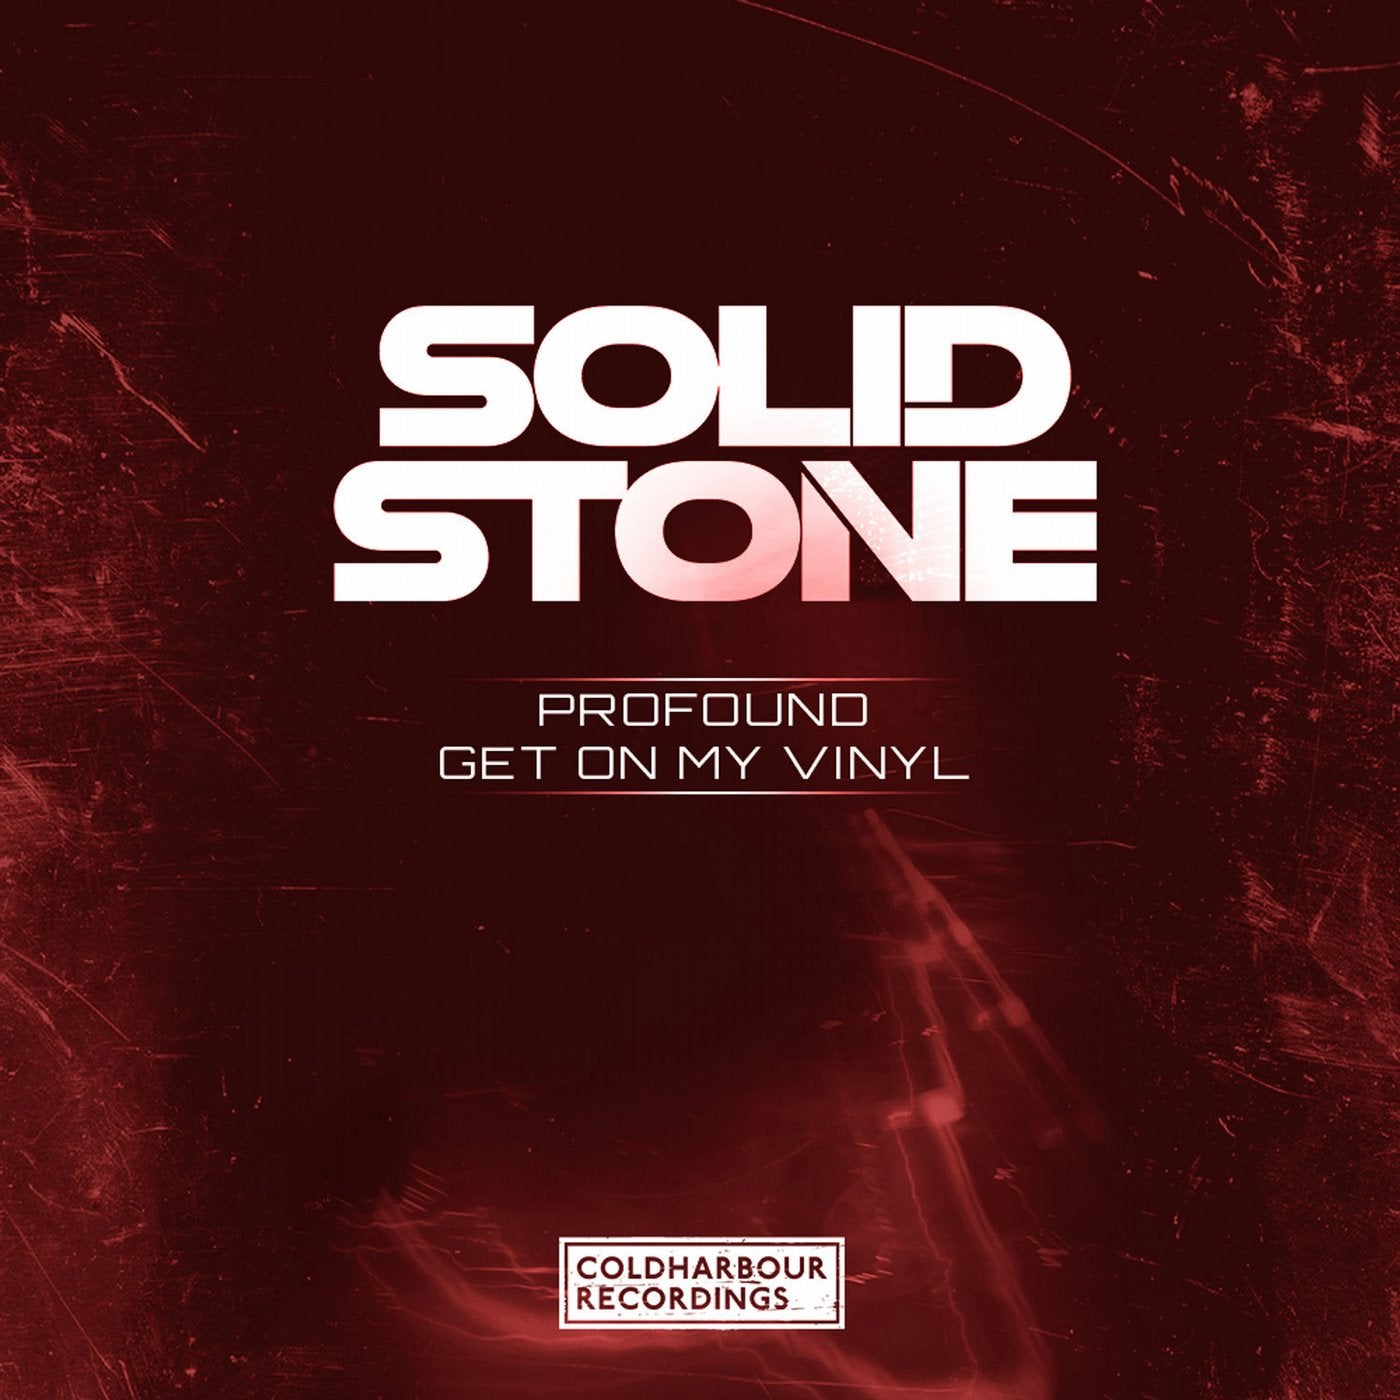 Solid stone. Coldharbour recordings – clhr009. Coldharbour recordings CD. Стоун музыка.